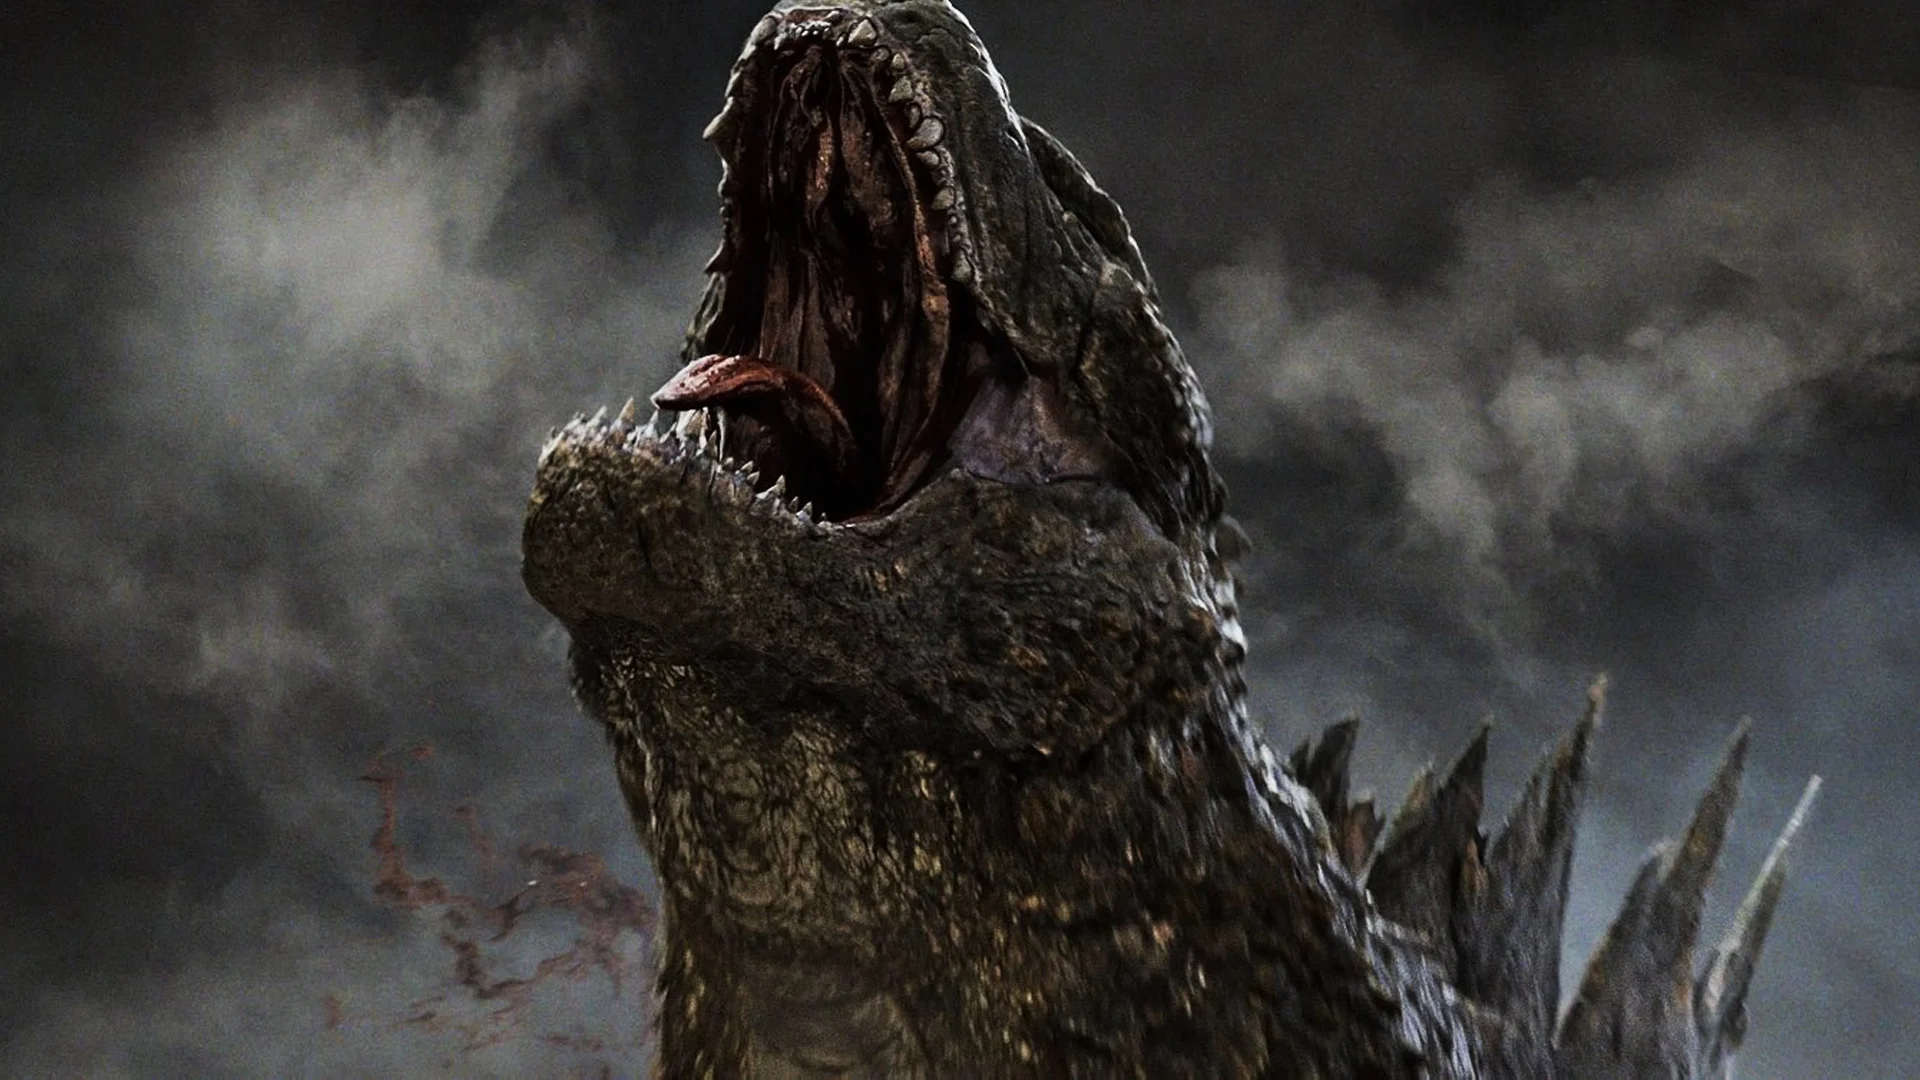 Godzilla Minus One: trailer and official images!